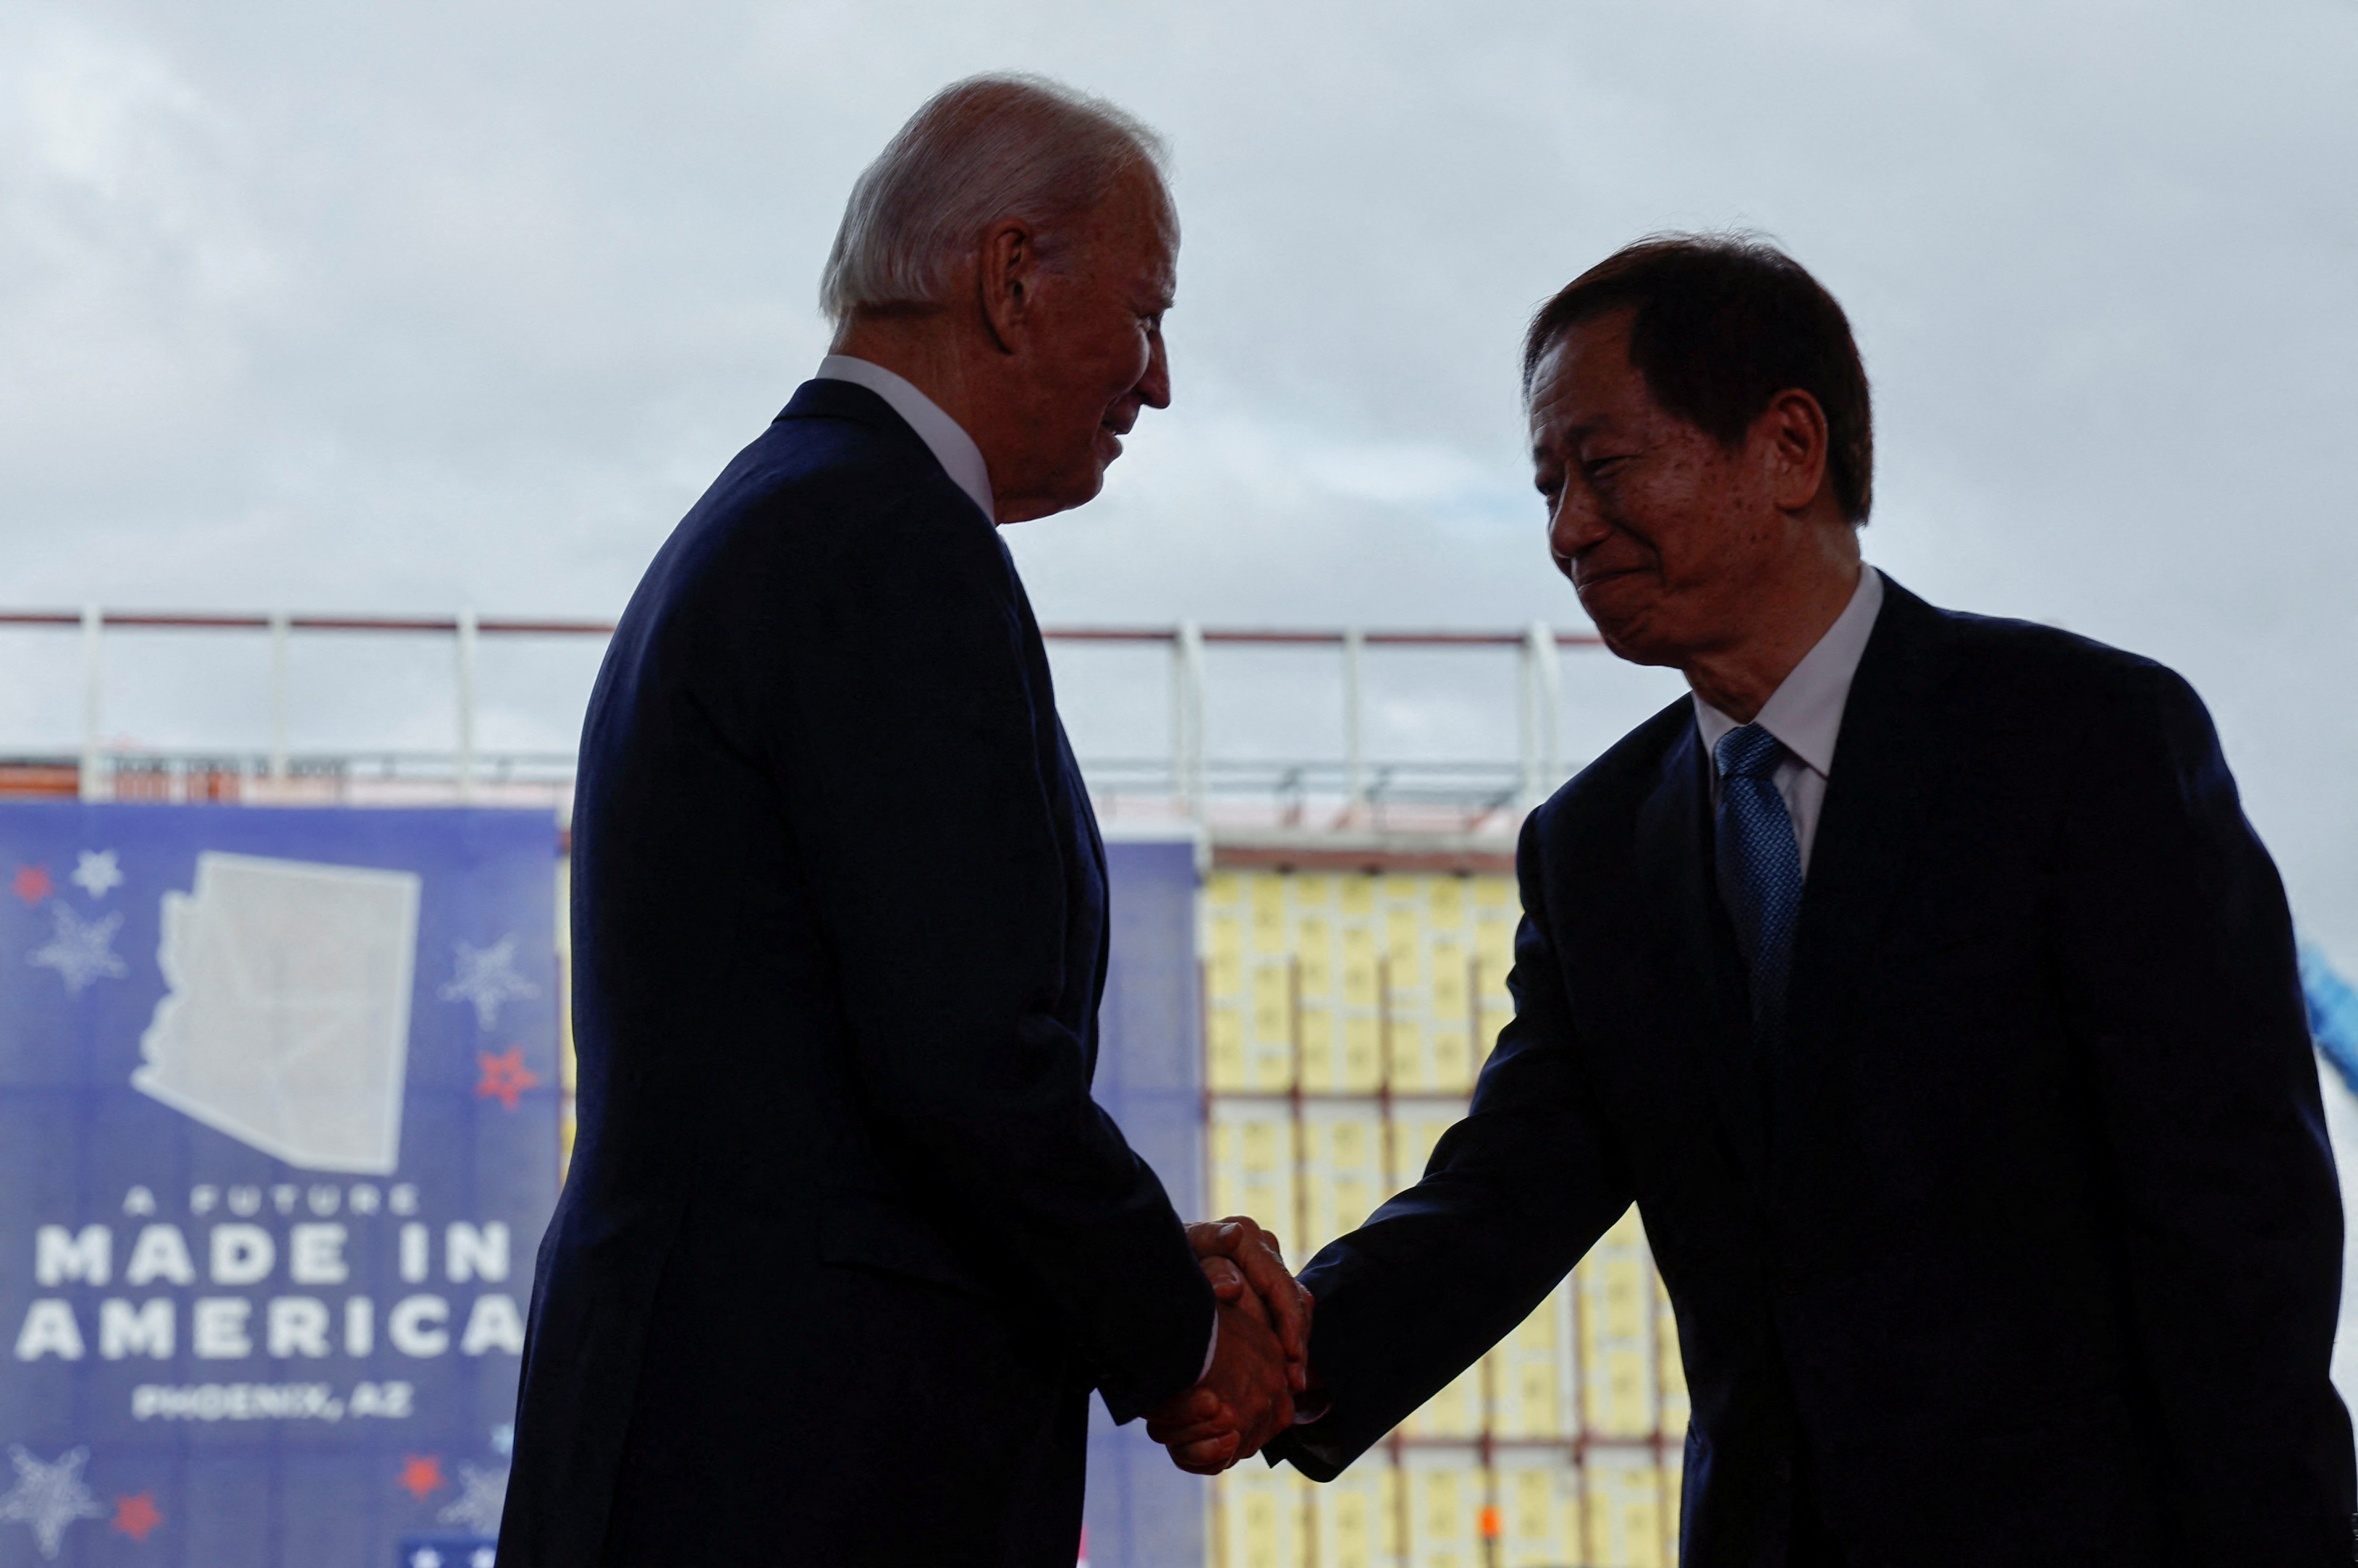 US President Joe Biden shakes hands with TSMC Chairman Mark Liu during a visit to TSMC's first semiconductor manufacturing plant in Phoenix, Arizona (REUTERS/Jonathan Ernst)